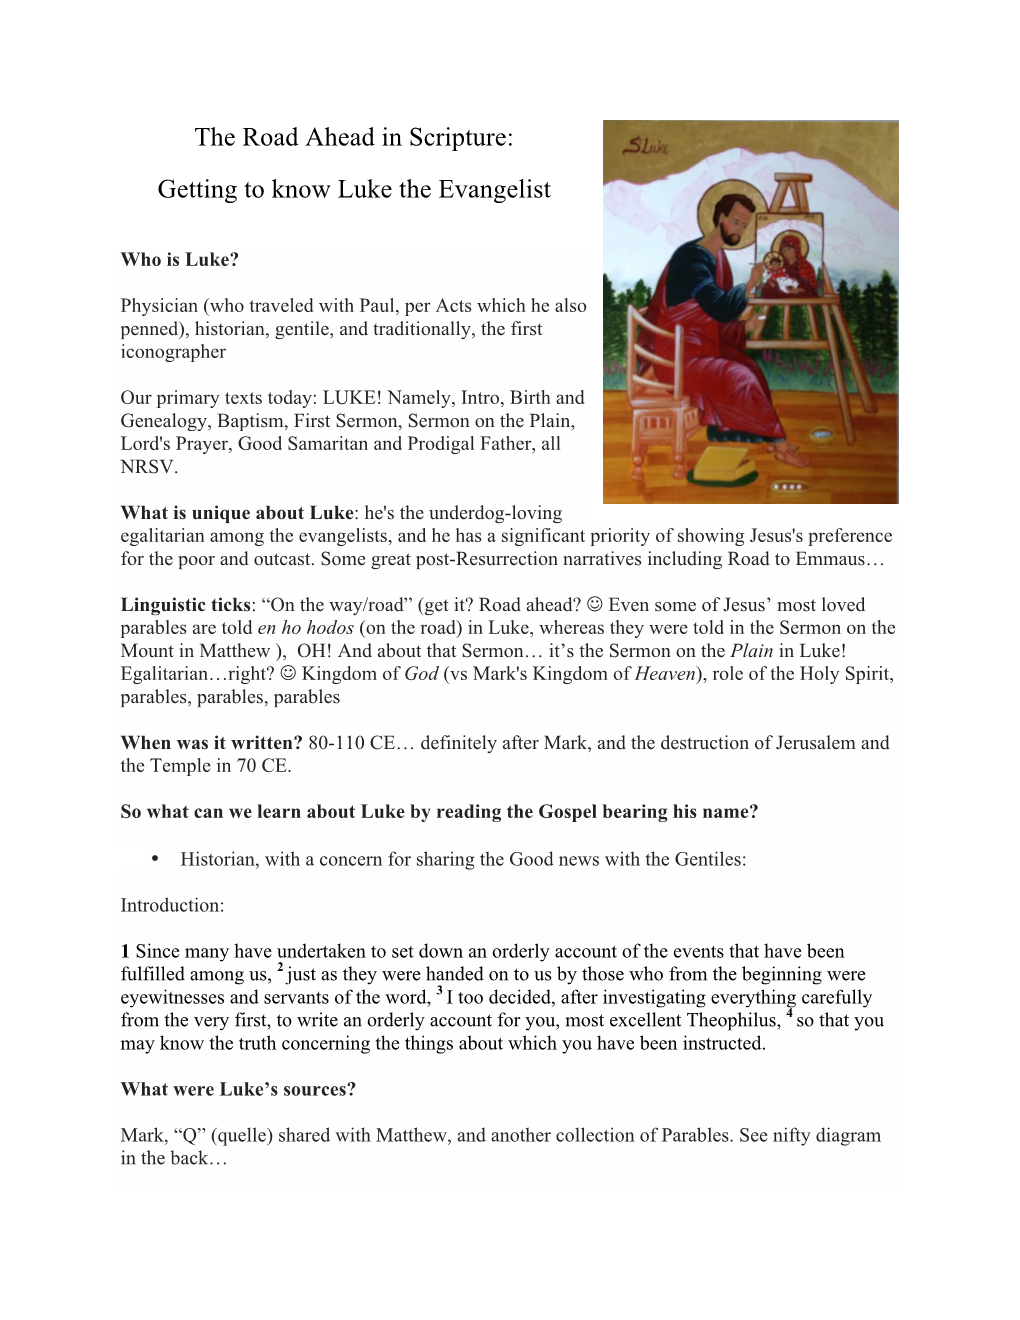 The Road Ahead in Scripture: Getting to Know Luke the Evangelist